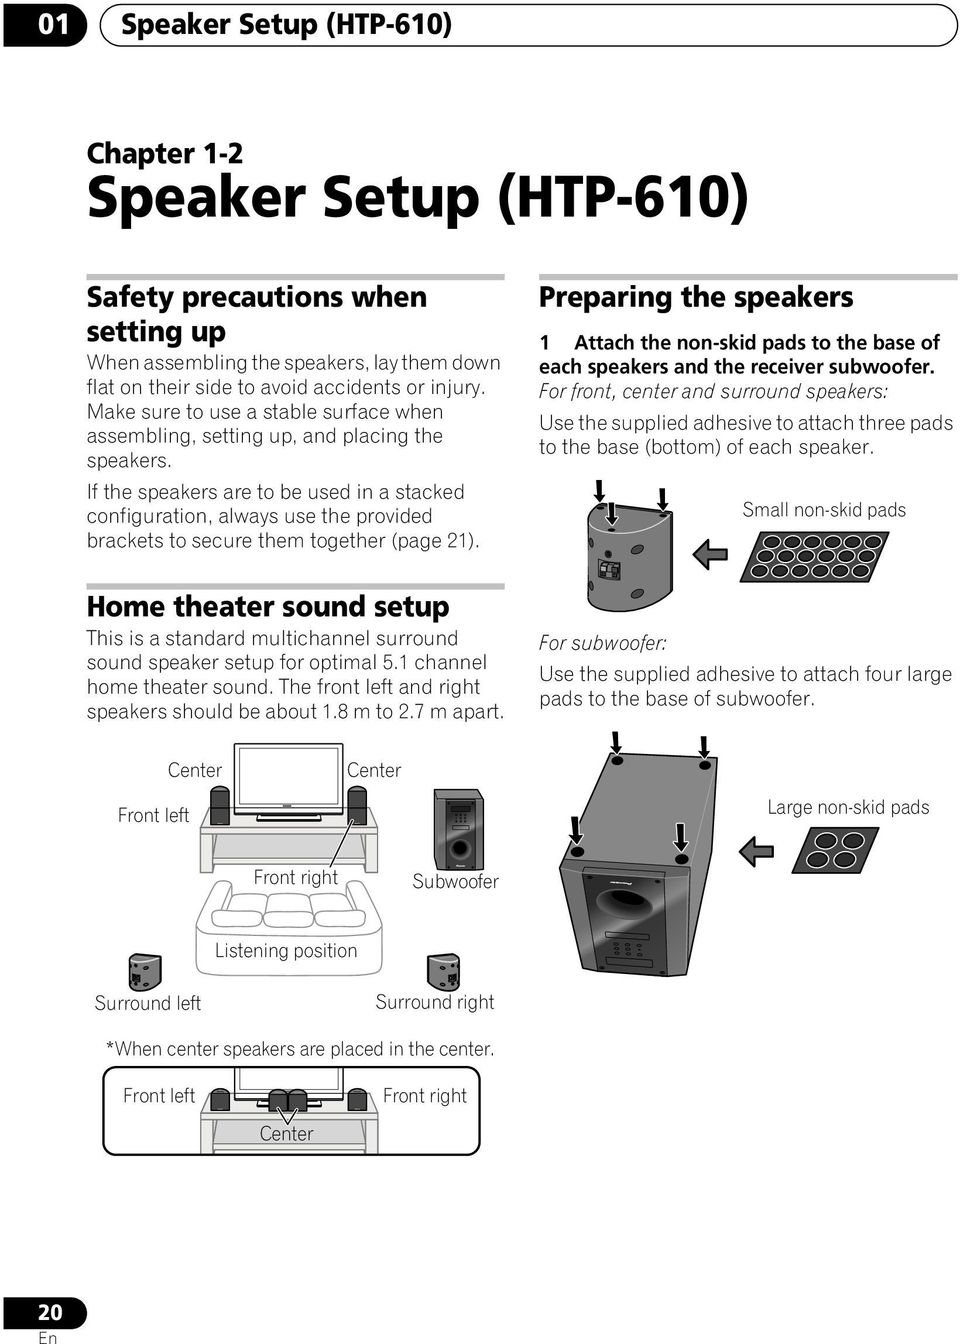 If the speakers are to be used in a stacked configuration, always use the provided brackets to secure them together (page 21).